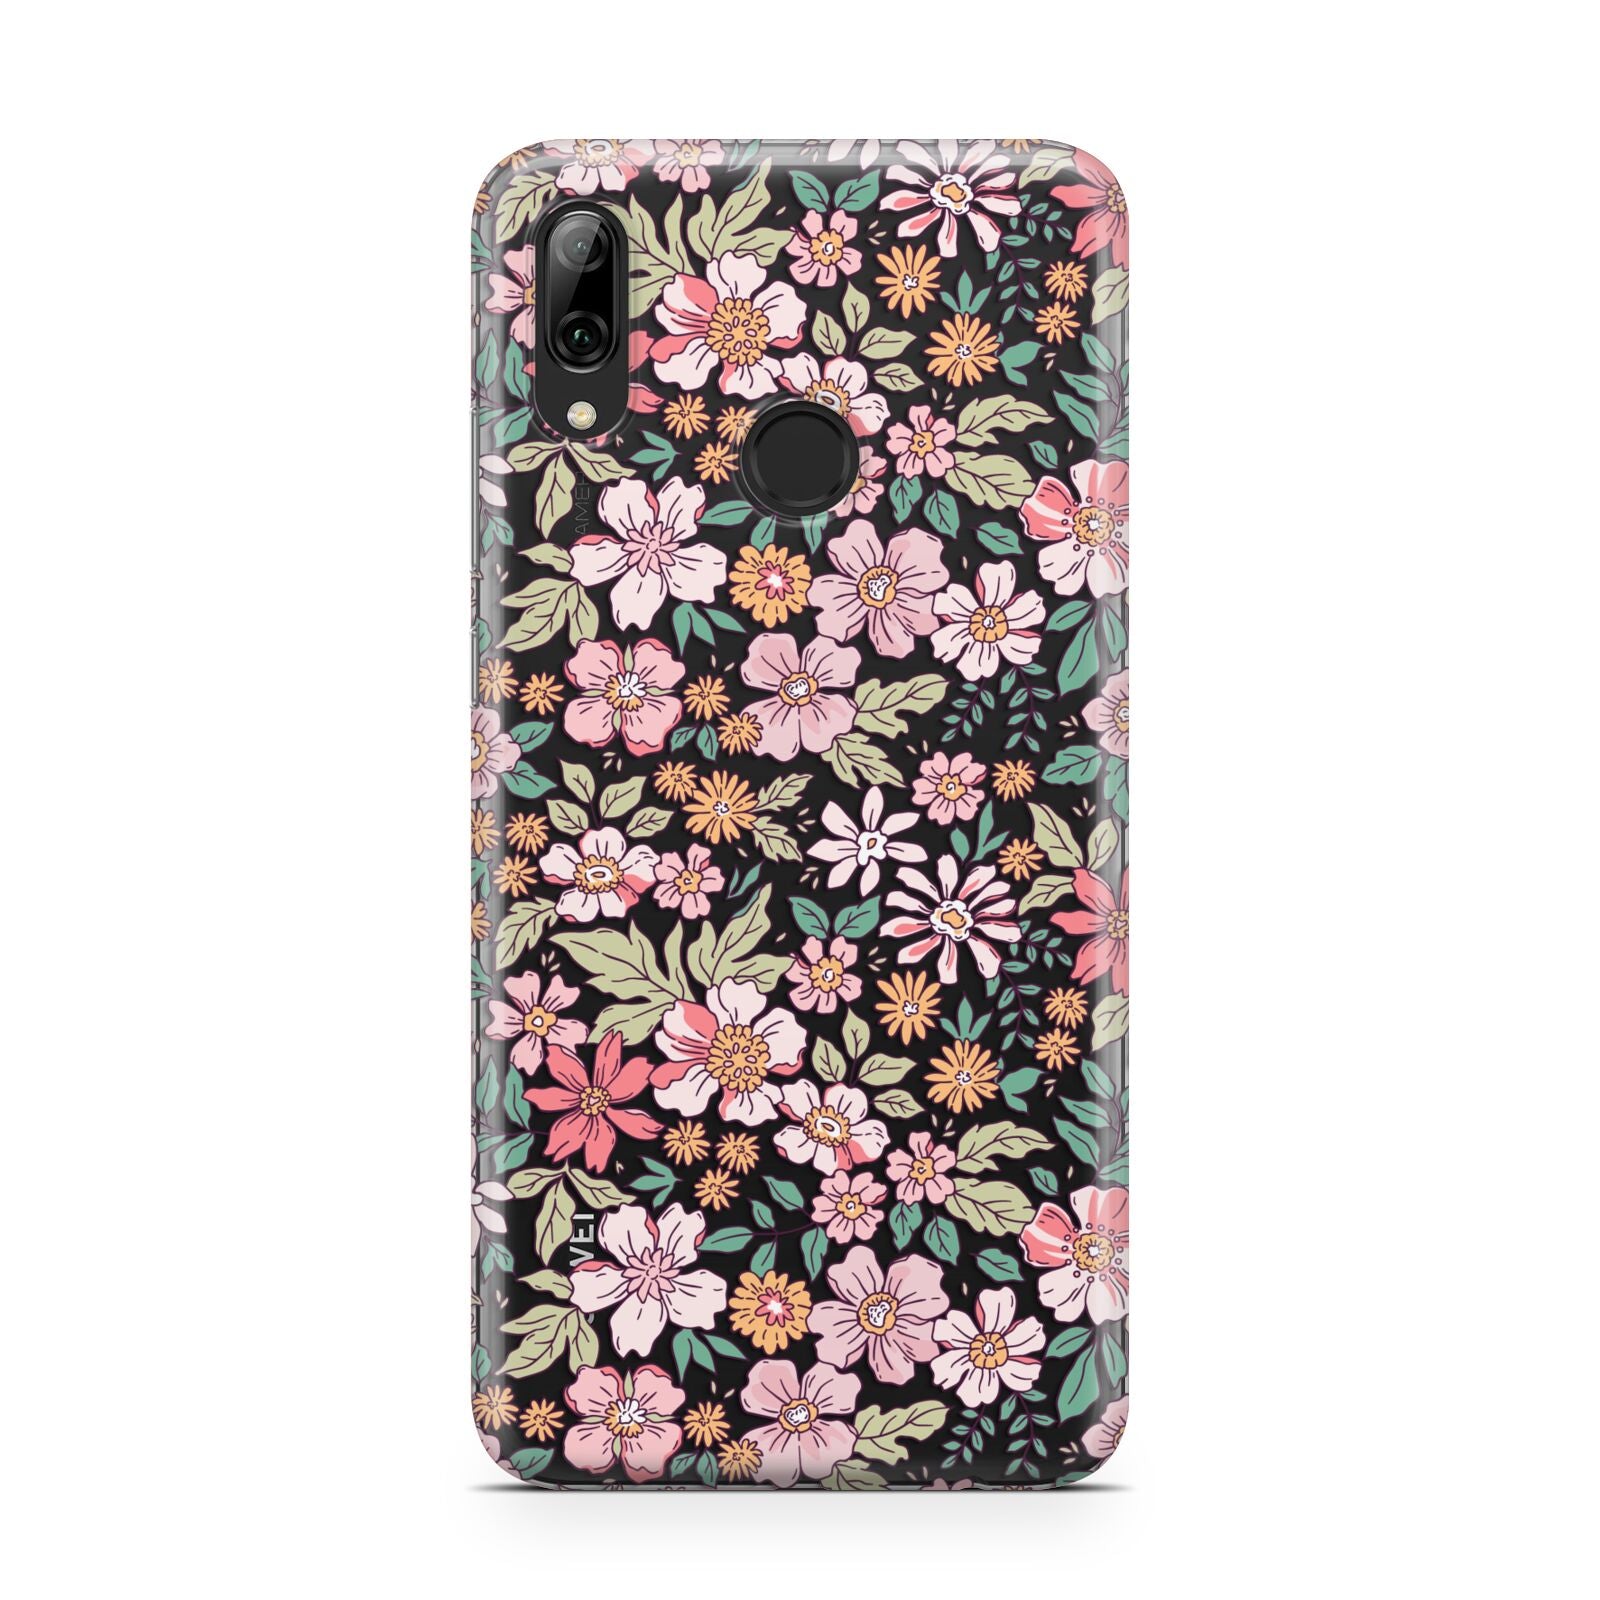 Small Floral Pattern Huawei Y7 2019